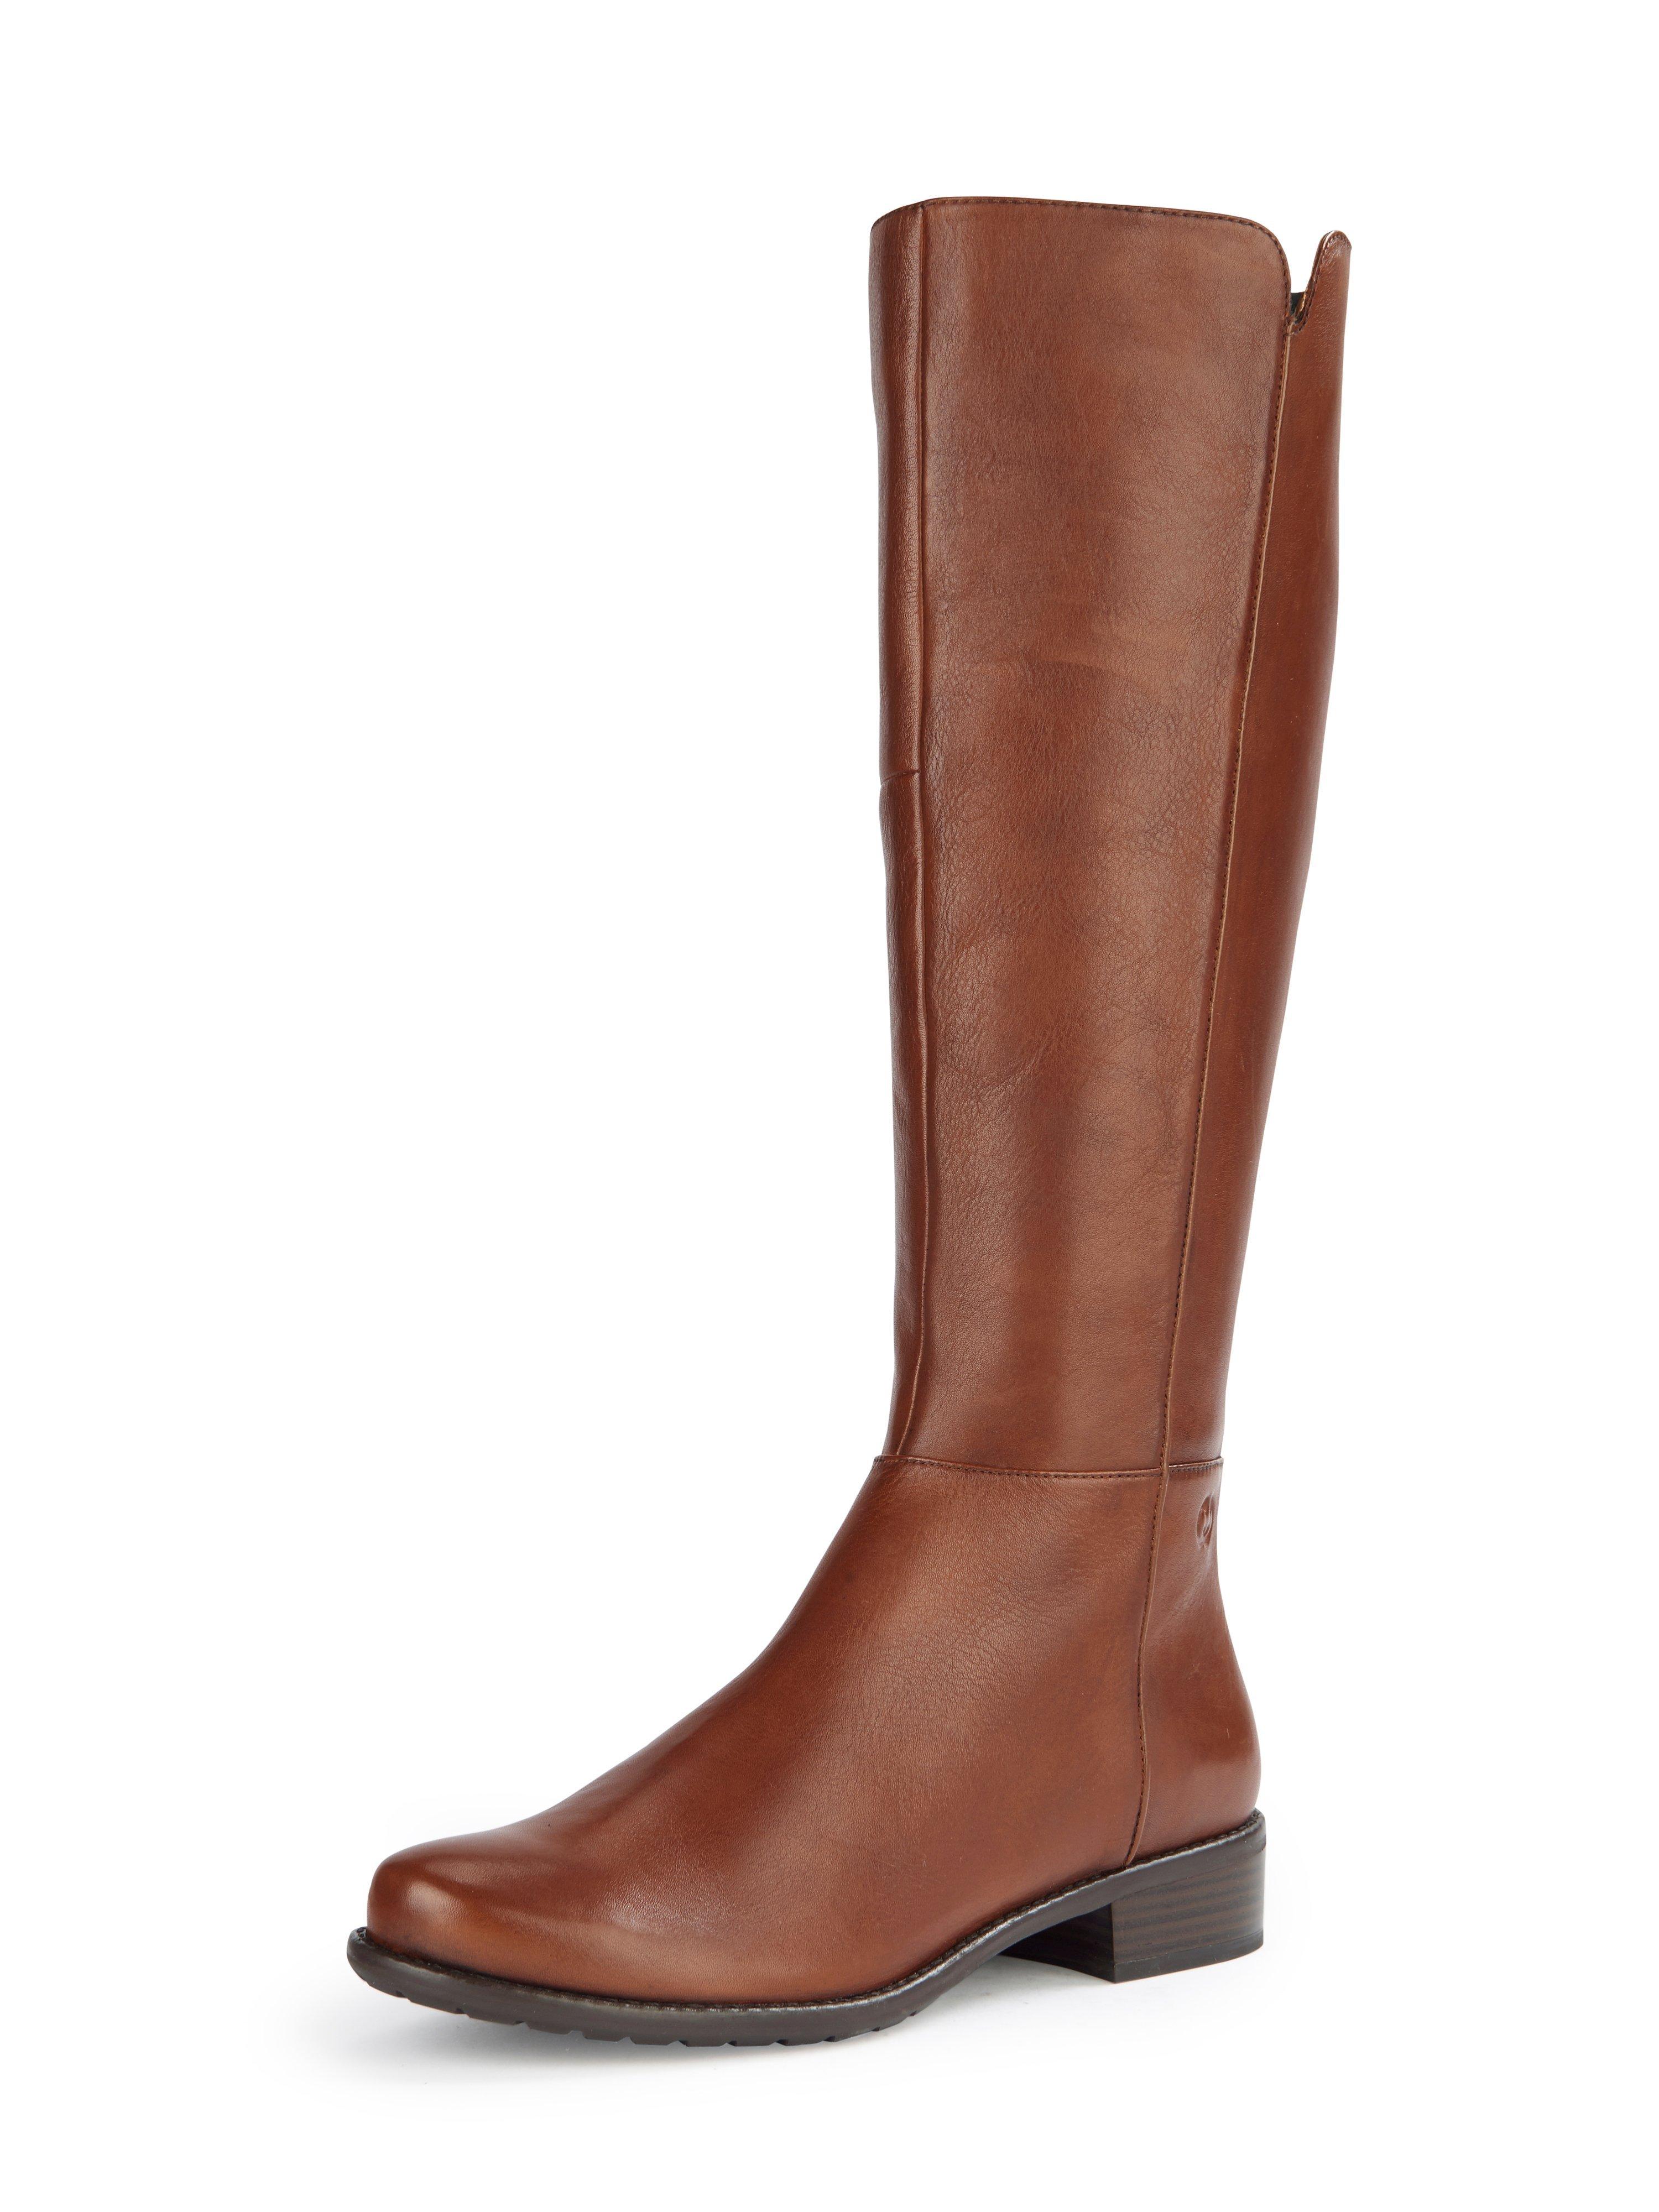 Gerry Weber - Long-shafted boots - Calla - brandy